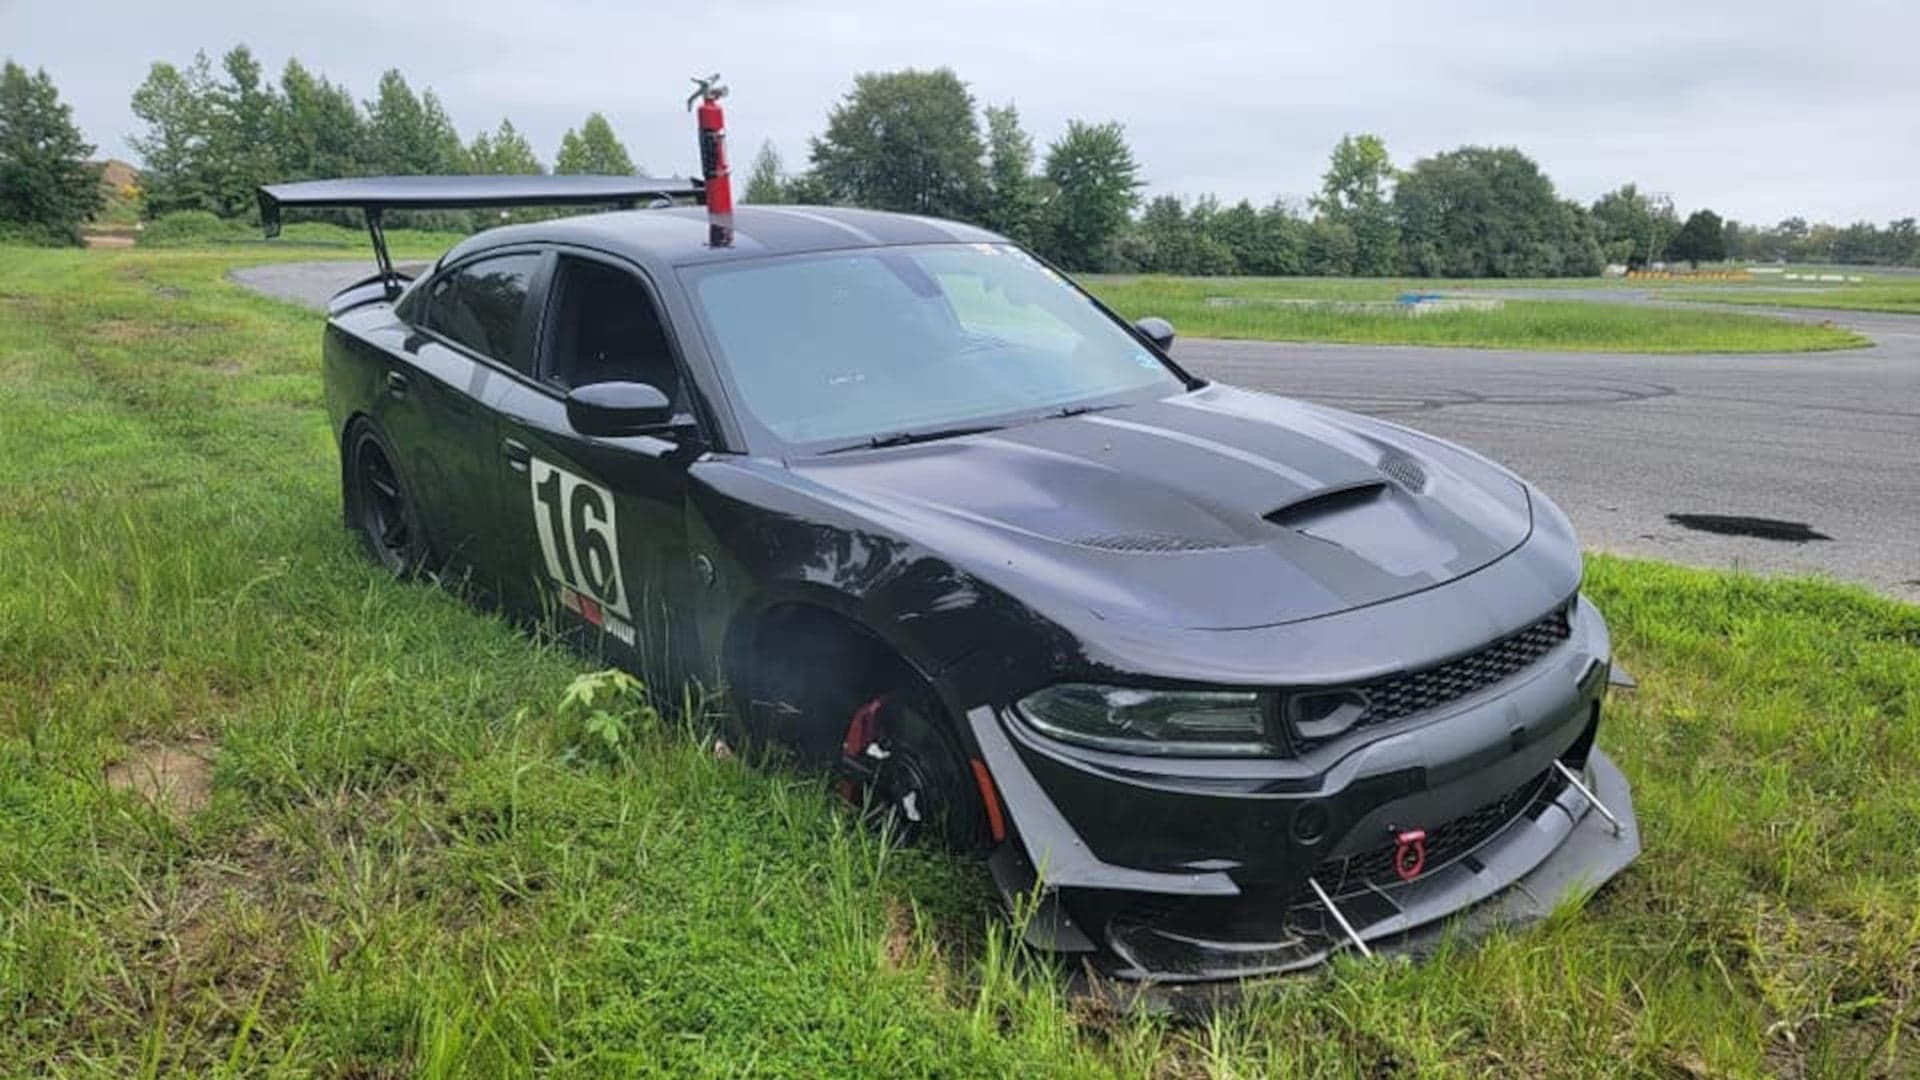 Dodge Charger Hellcat Track Car’s Snapped Wheel Shows Why Quality Parts Matter